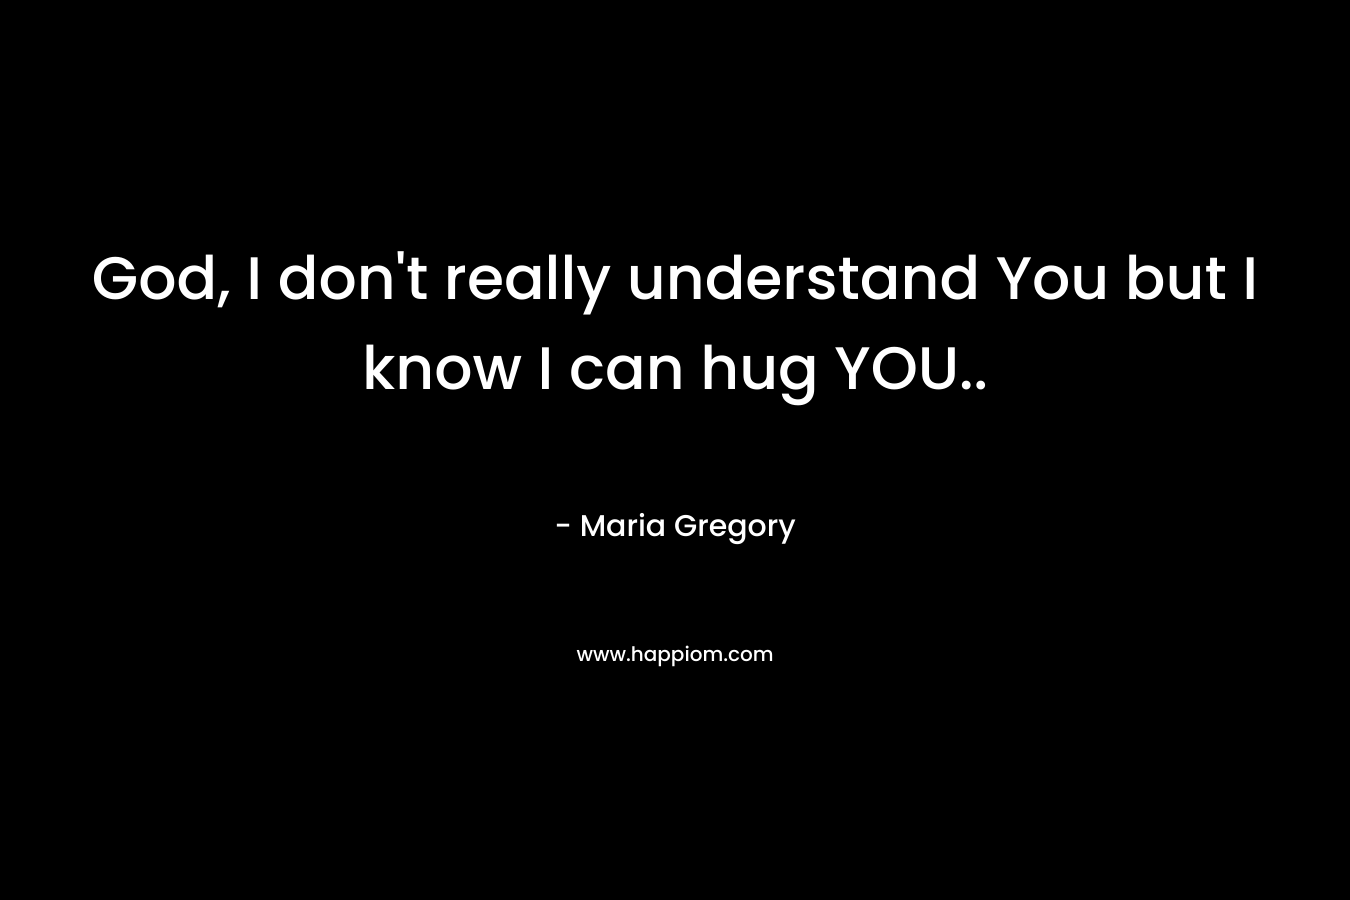 God, I don't really understand You but I know I can hug YOU..